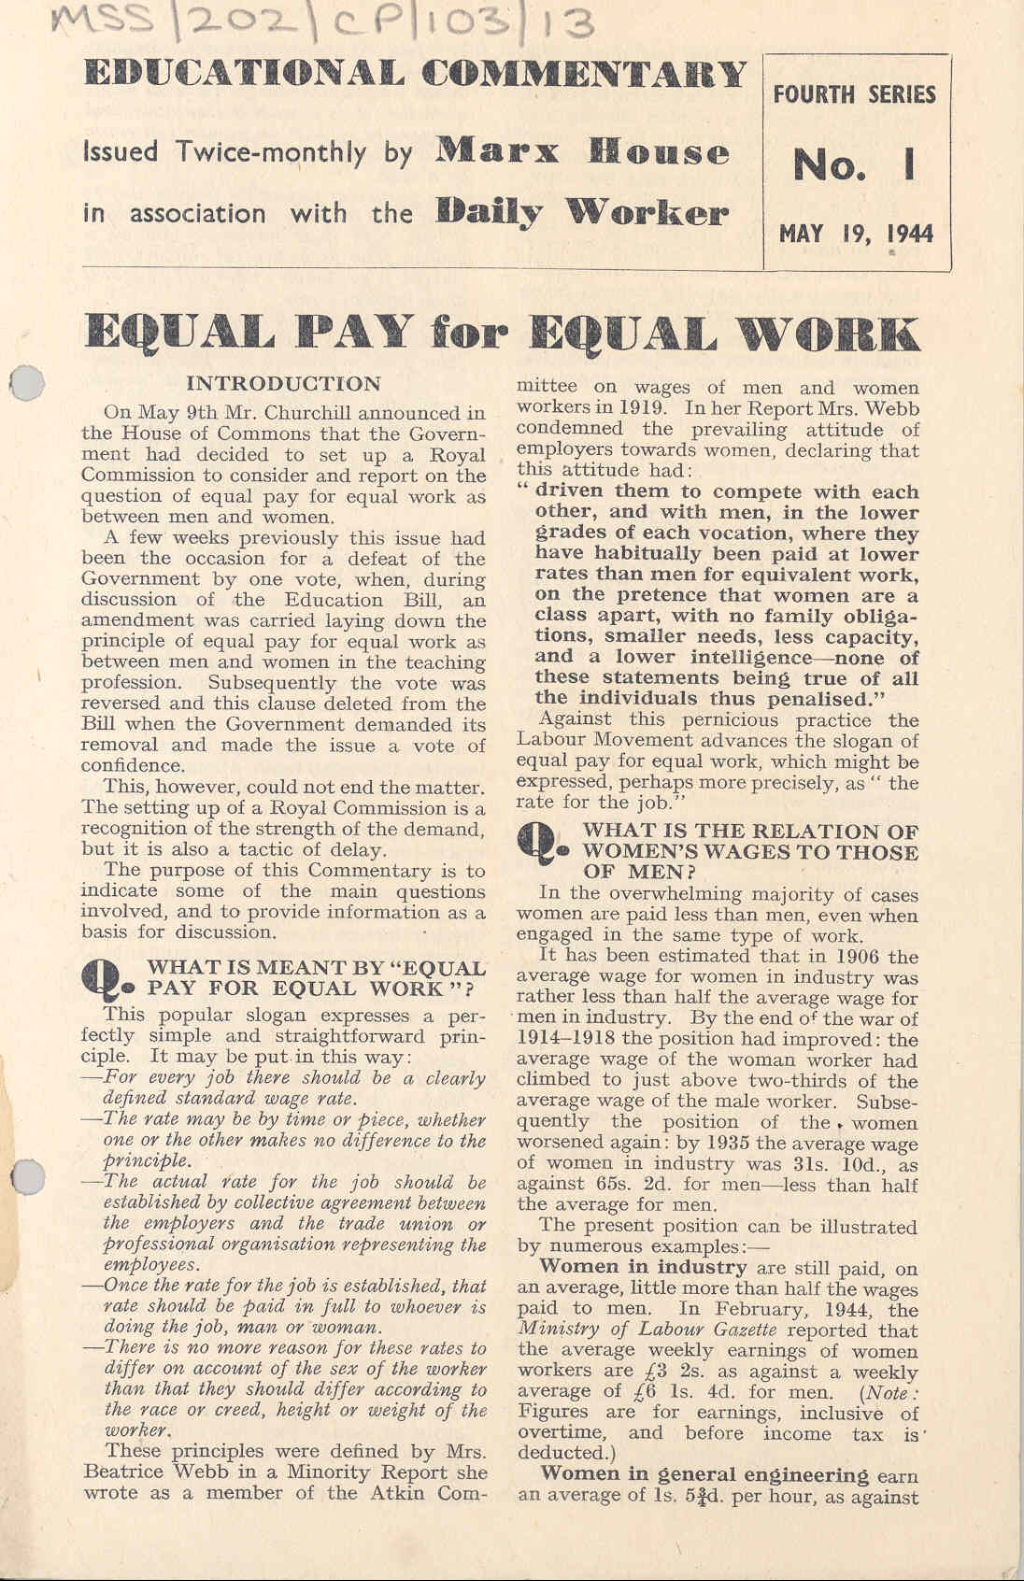 Front page of 'Equal Pay for Equal Work': Daily Worker 'Educational Commentary'